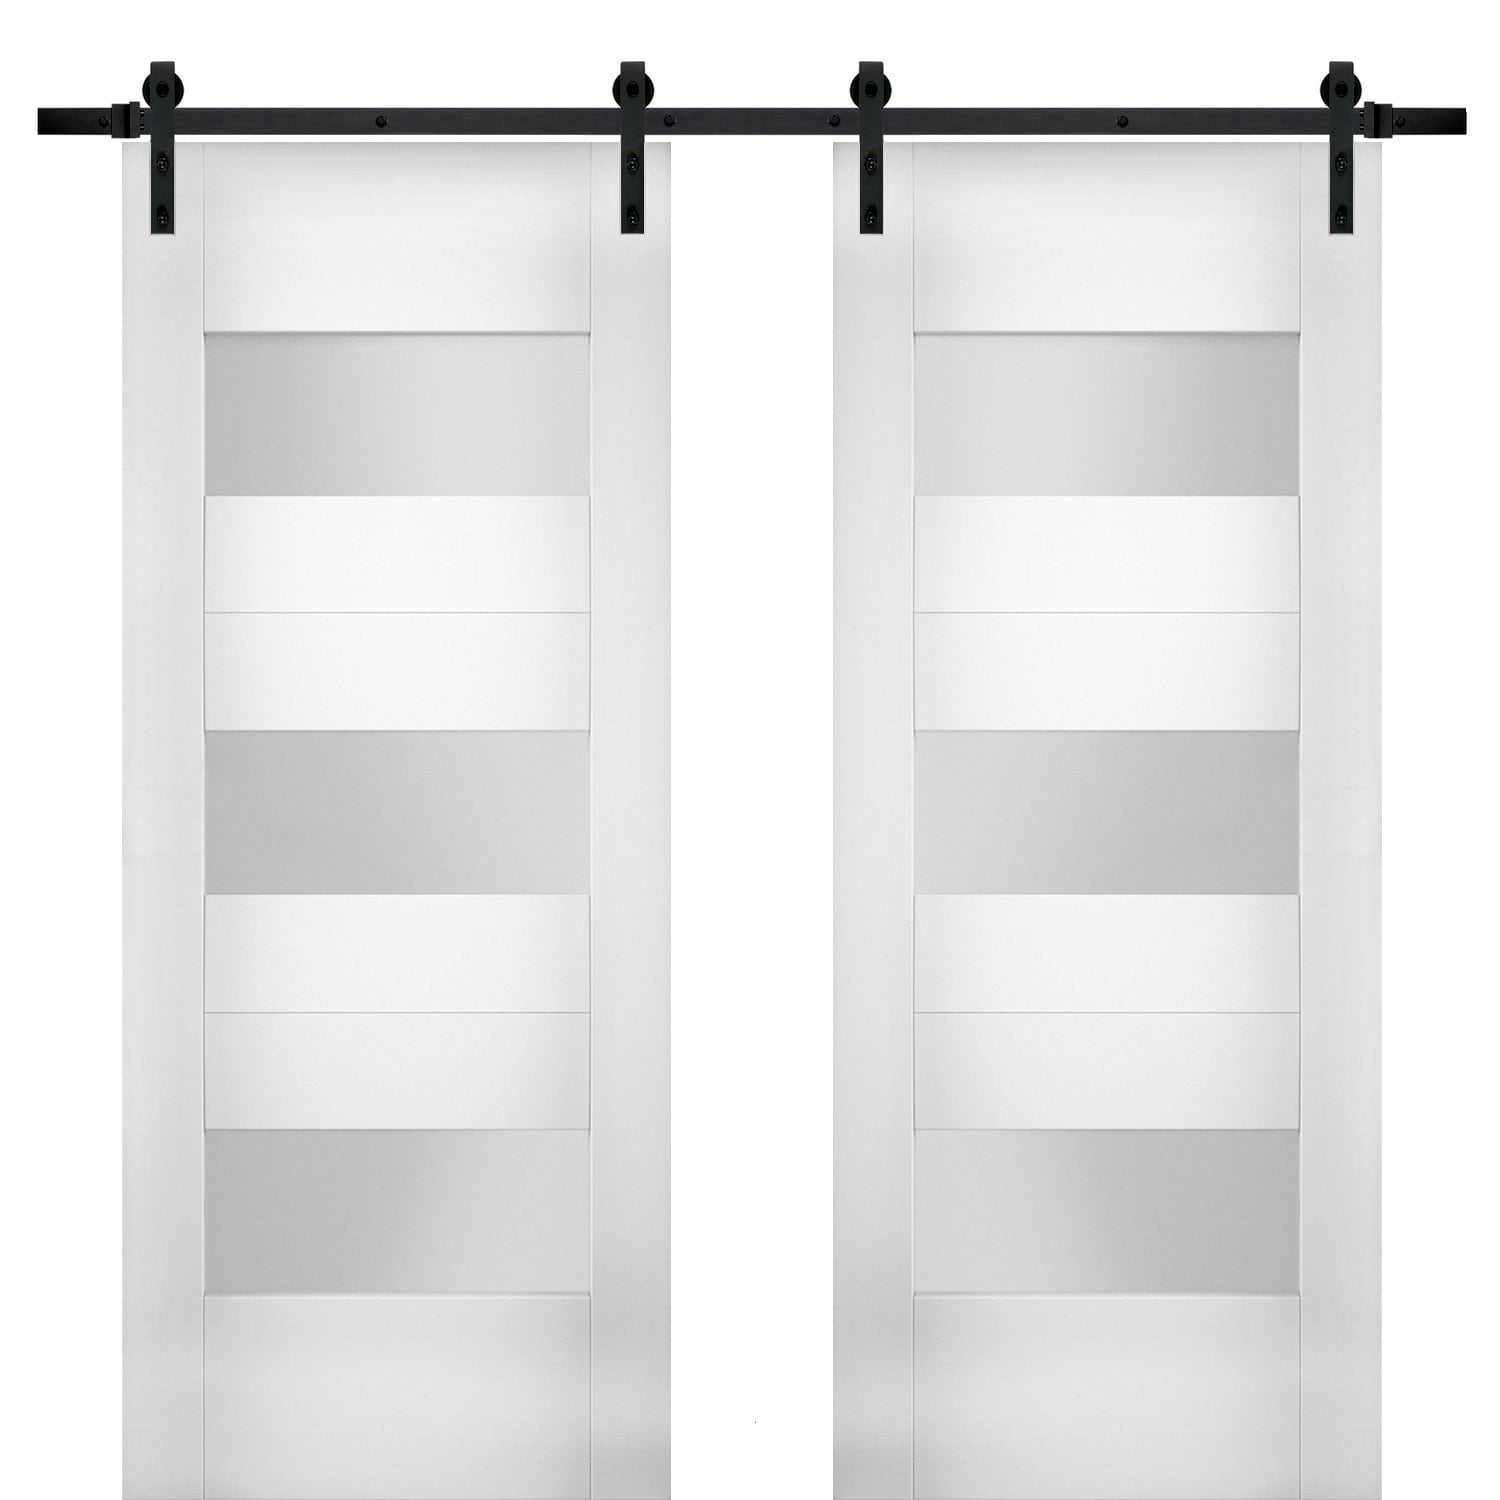 Modern Double Barn Door 64 x 96 inches with Opaque Glass 4 Lites/Mela 7222 White Silk/Stainless Steel 13FT Rail Track Set/Solid Panel Interior Doors 